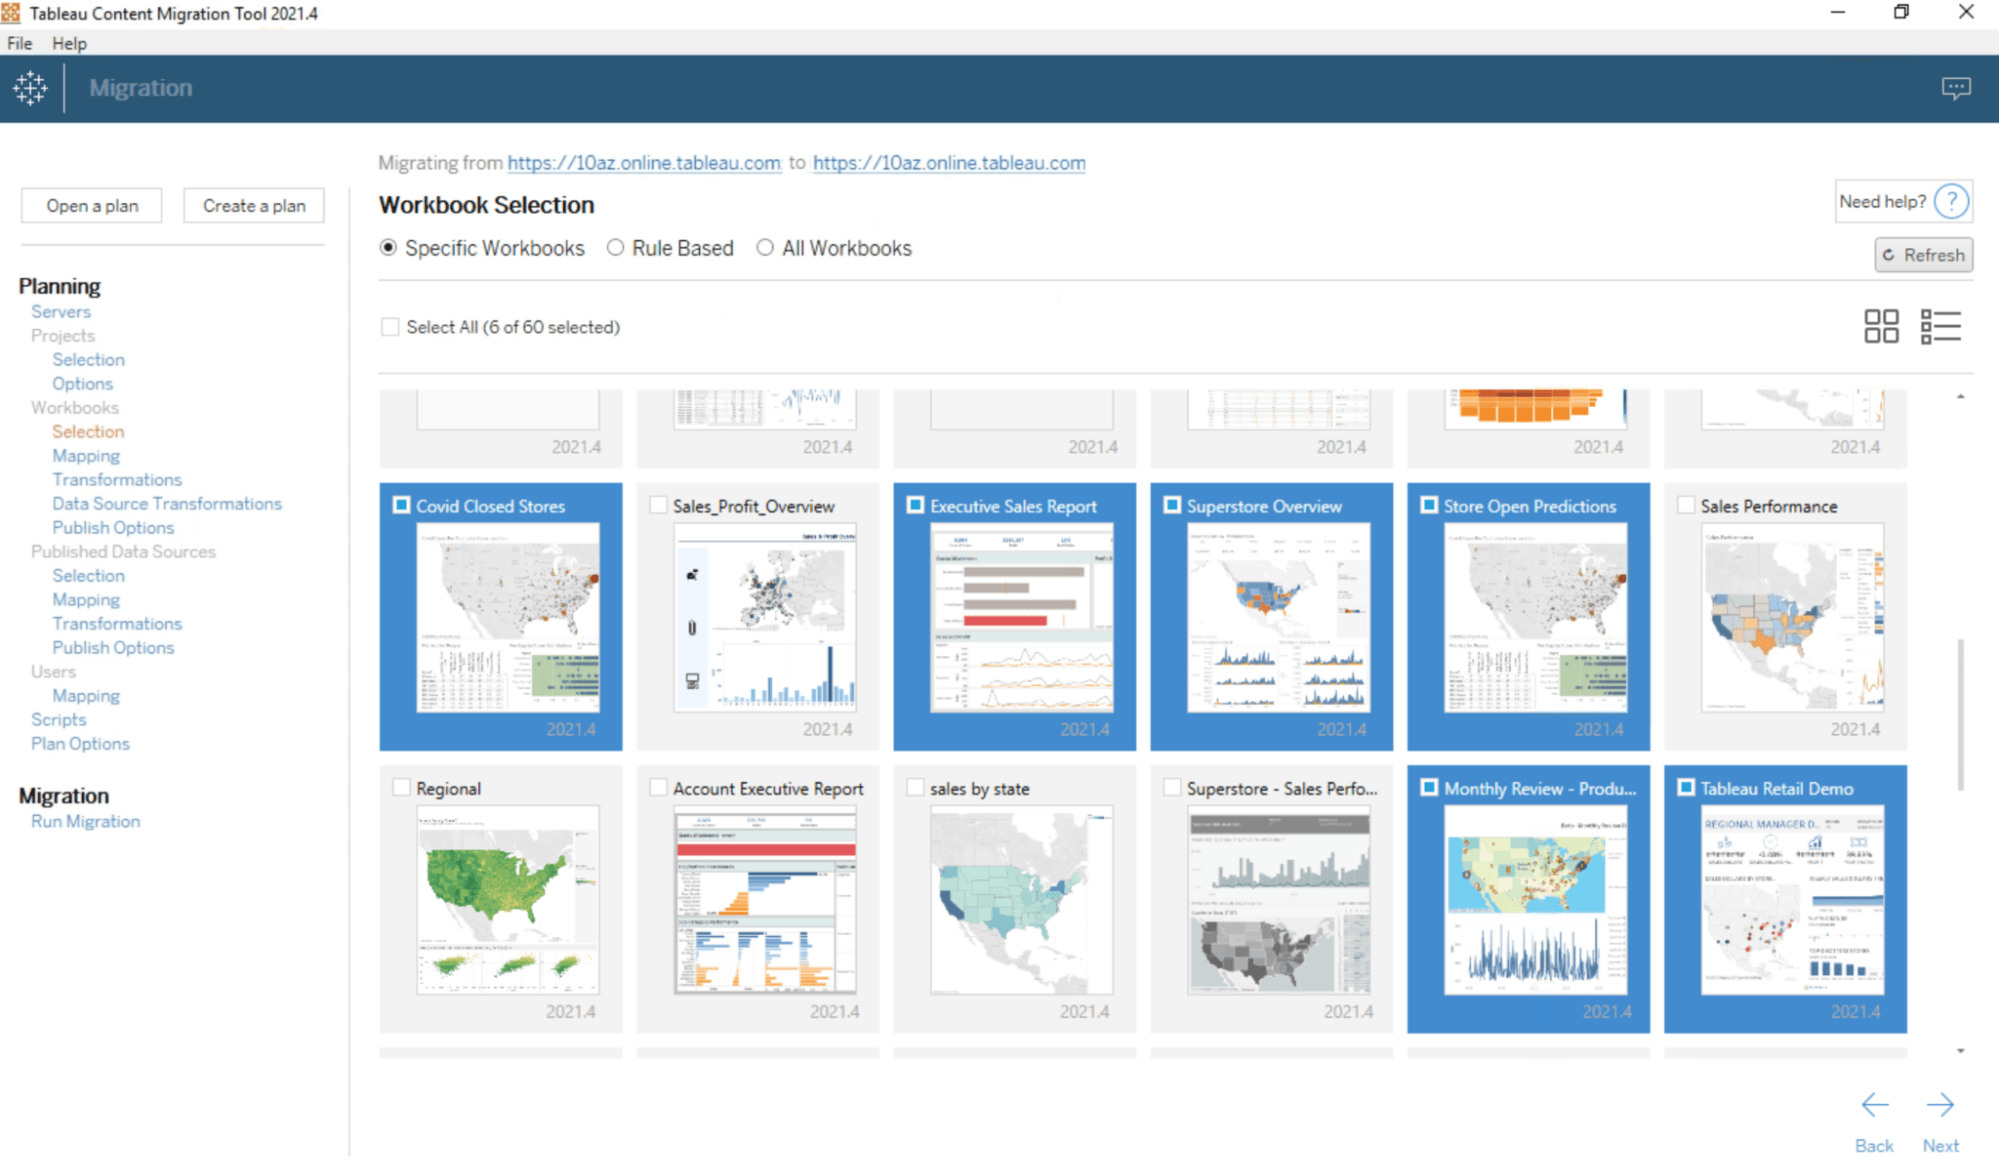 Tableau Cloud interface where a site administrator is selecting a number of workbooks to copy or move using the Content Migration Tool.